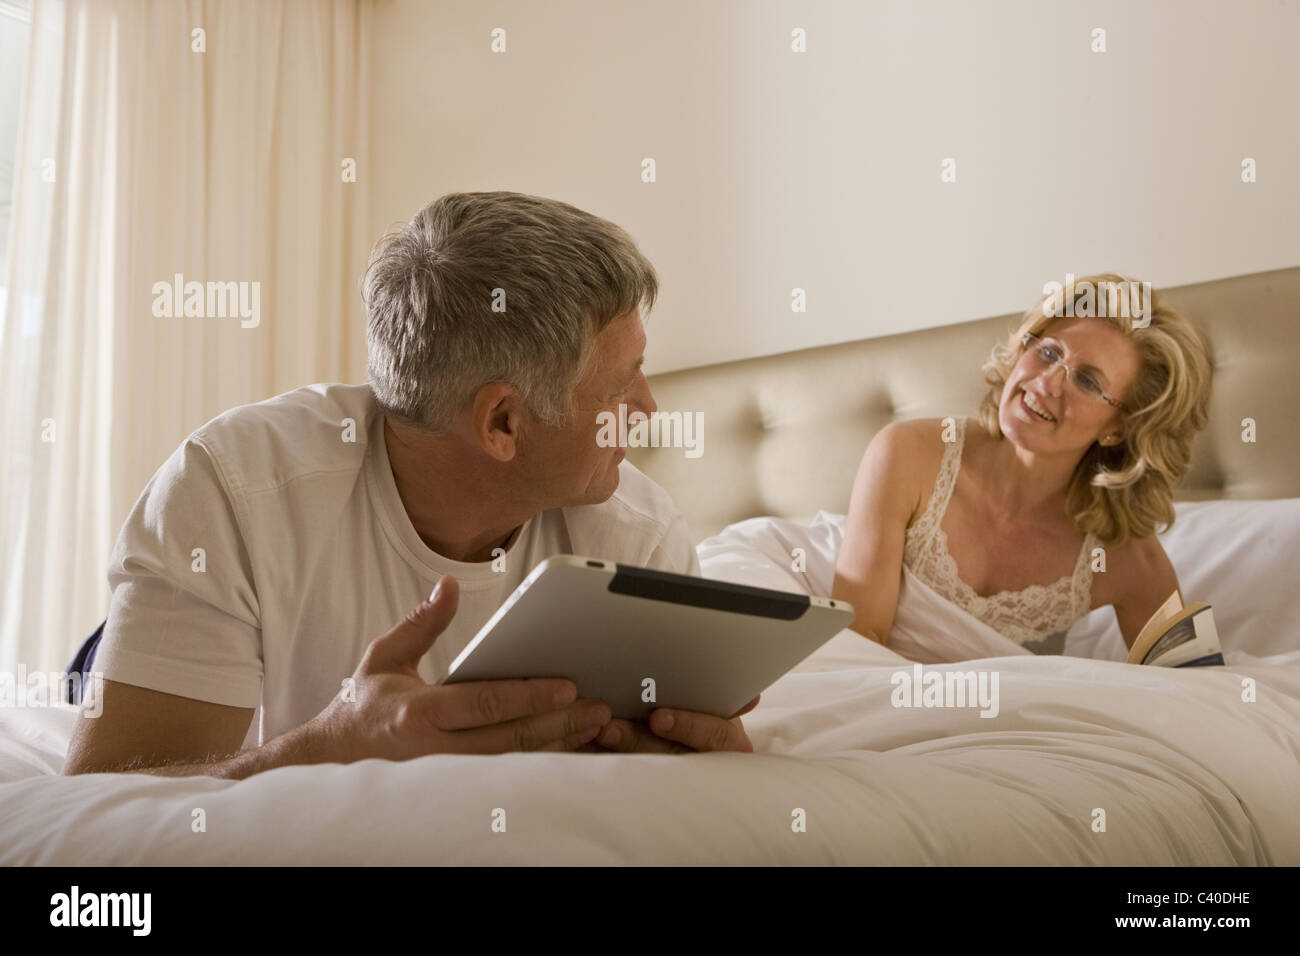 Man using tablet computer on bed Banque D'Images